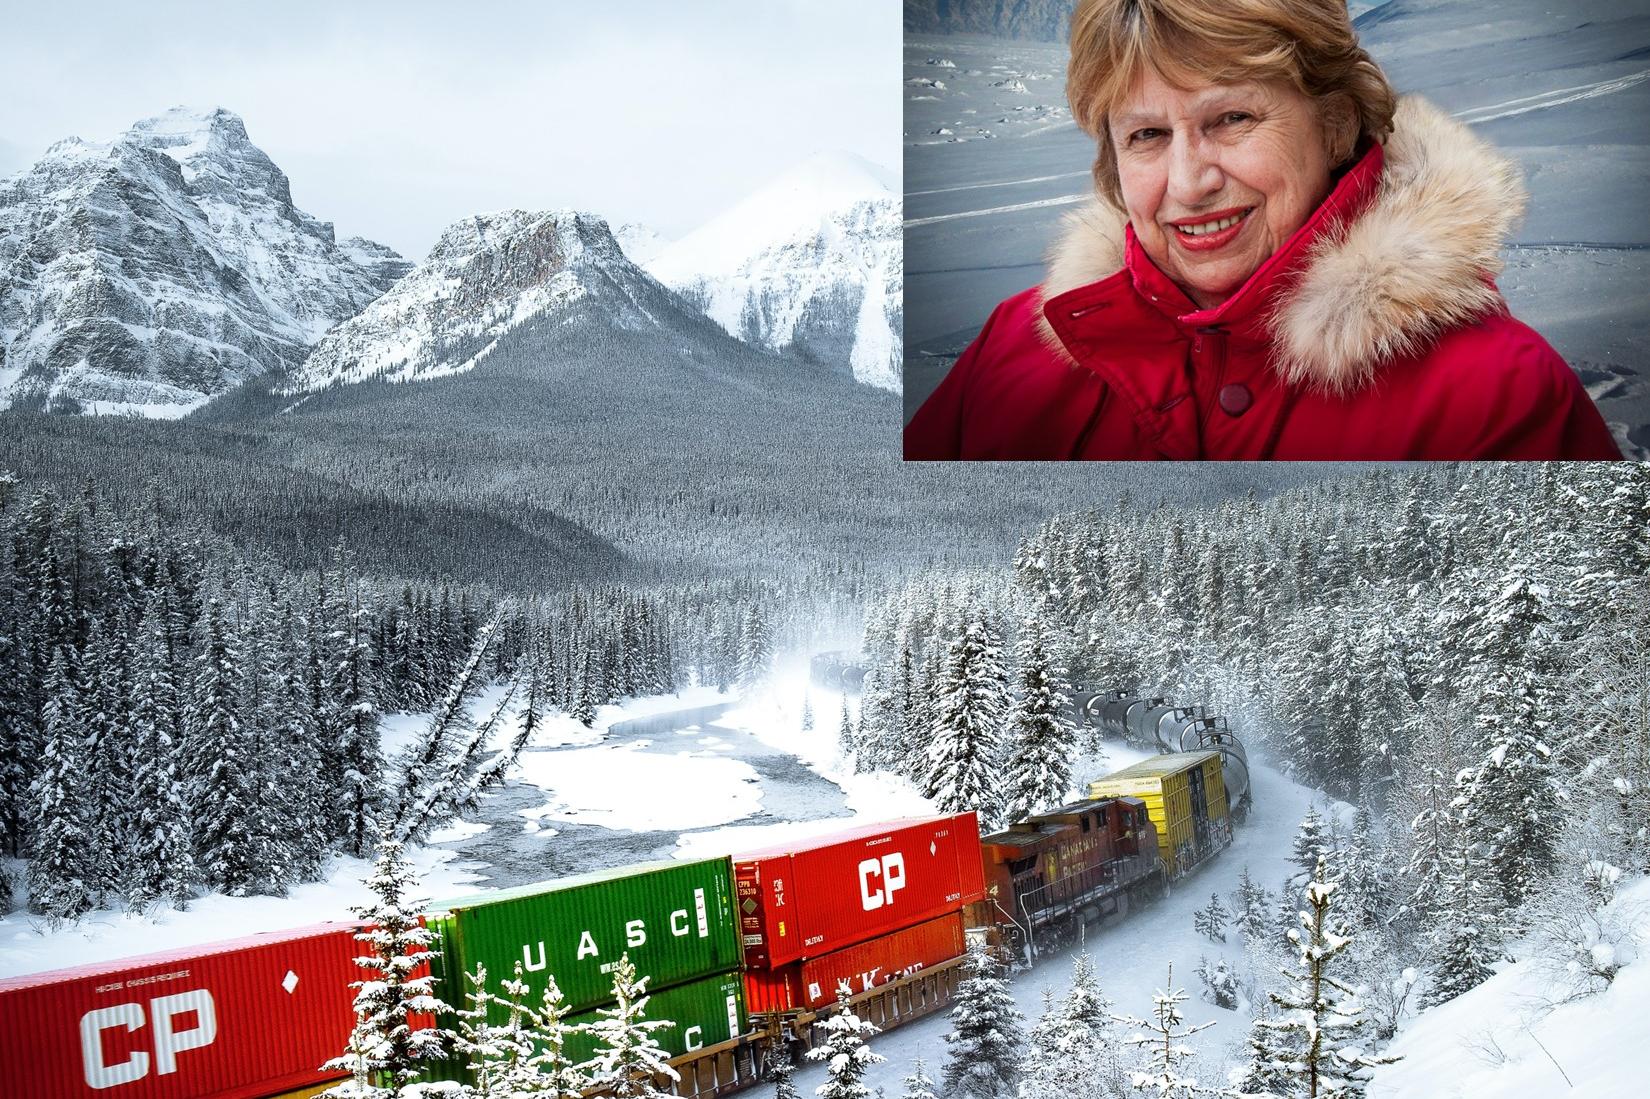 freight train travelling through northern winter landscape with inset image of Caucasian woman in arctic landscape wearing bright red parka